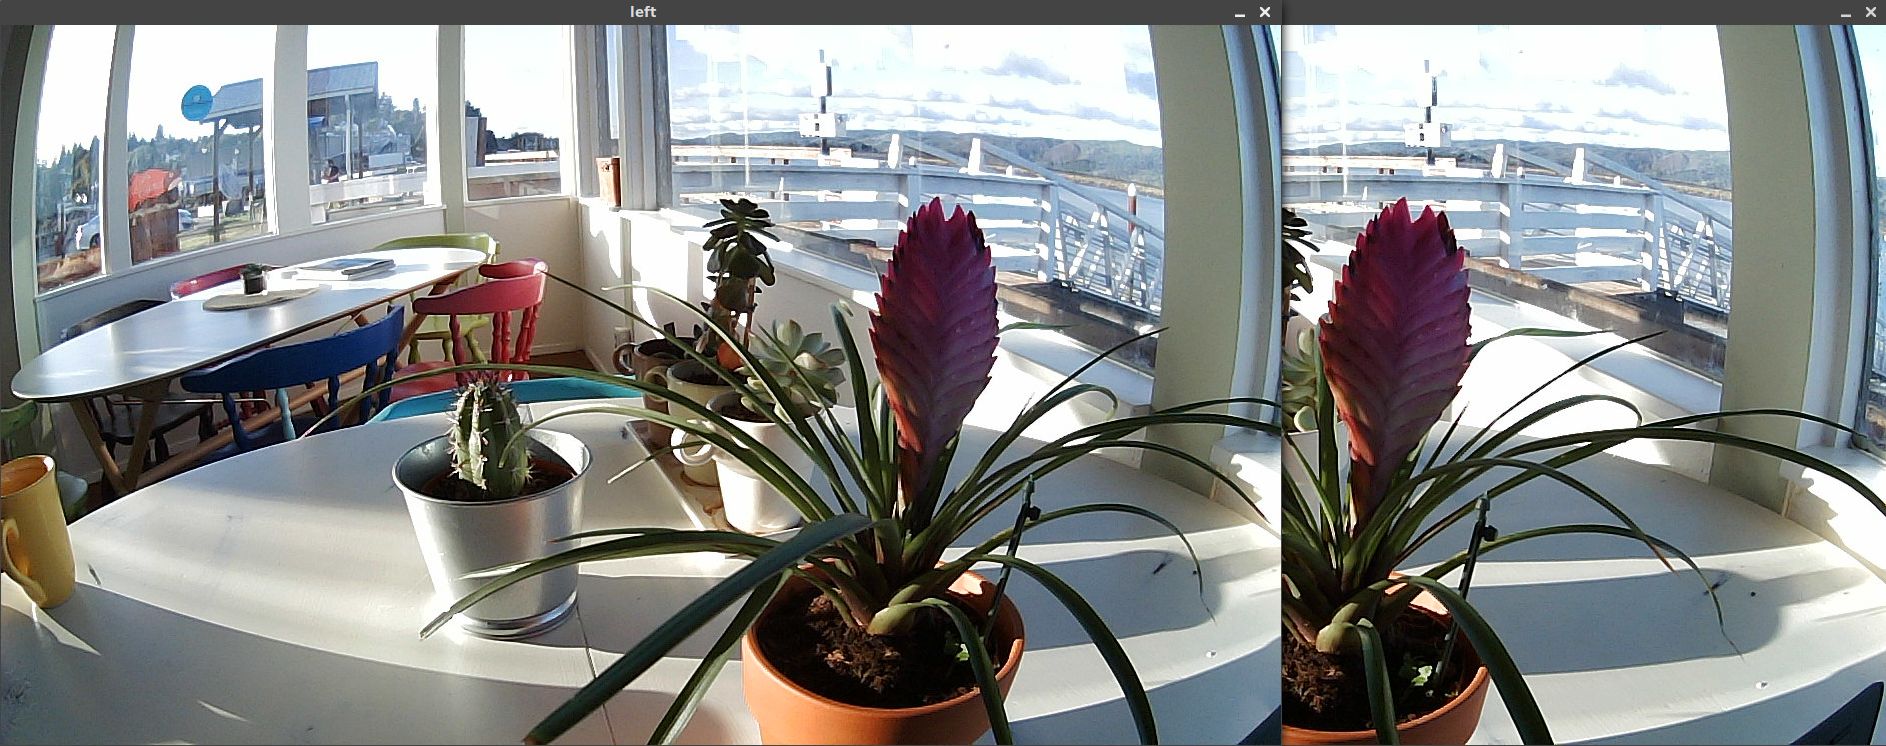 Full-resolution stereo view of potted plants